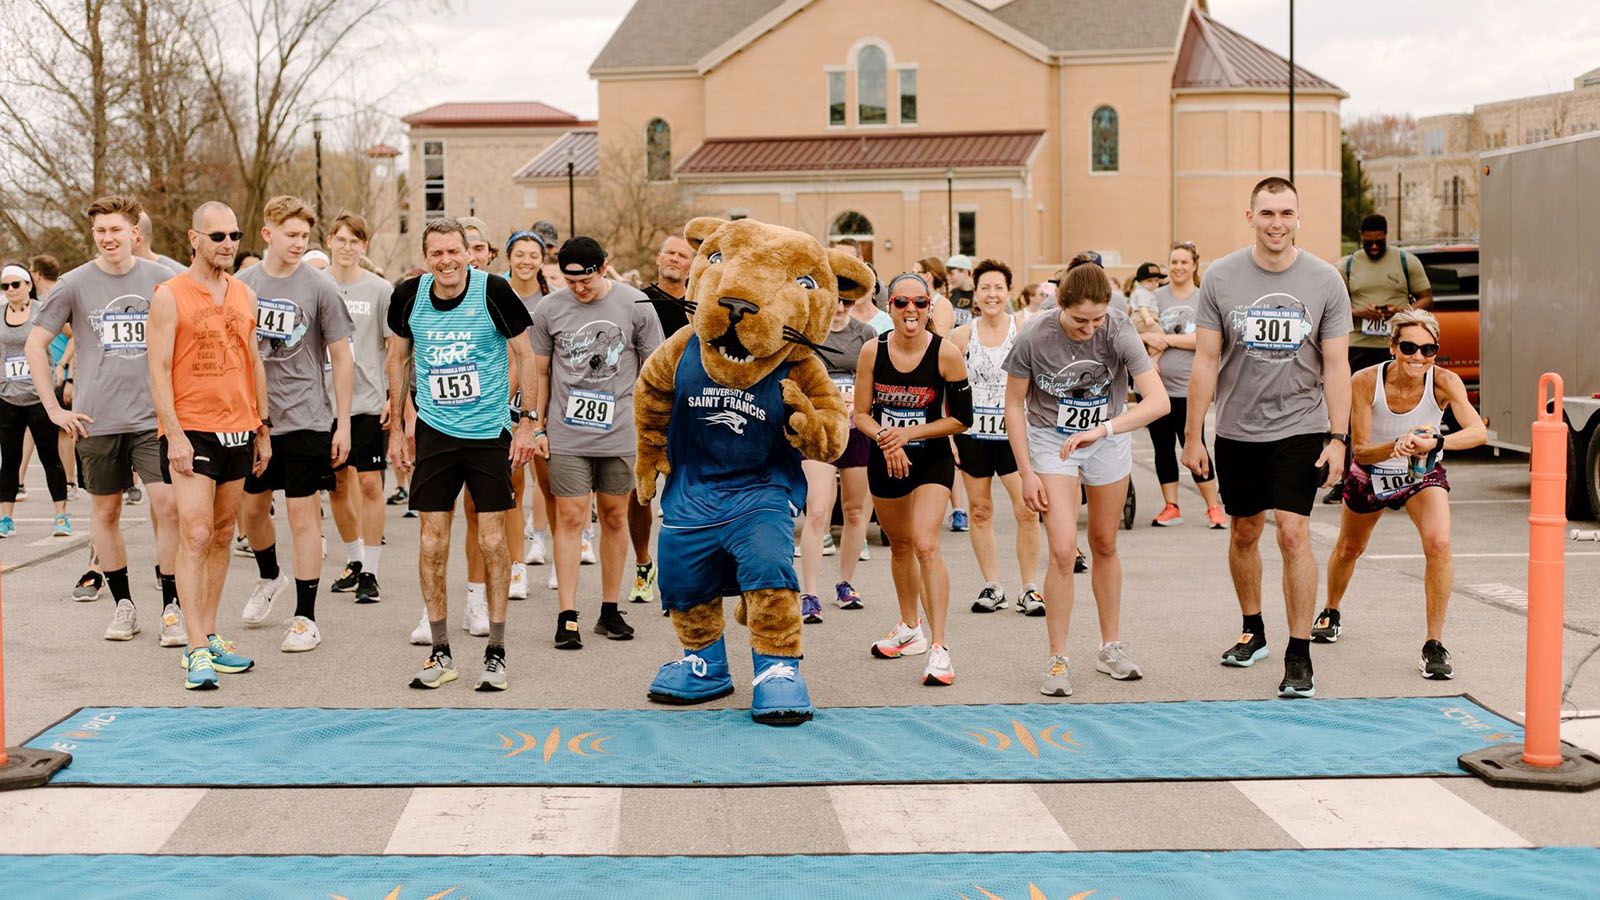 The Formula for Life 5K will be Sunday, April 16, at the University of Saint Francis.